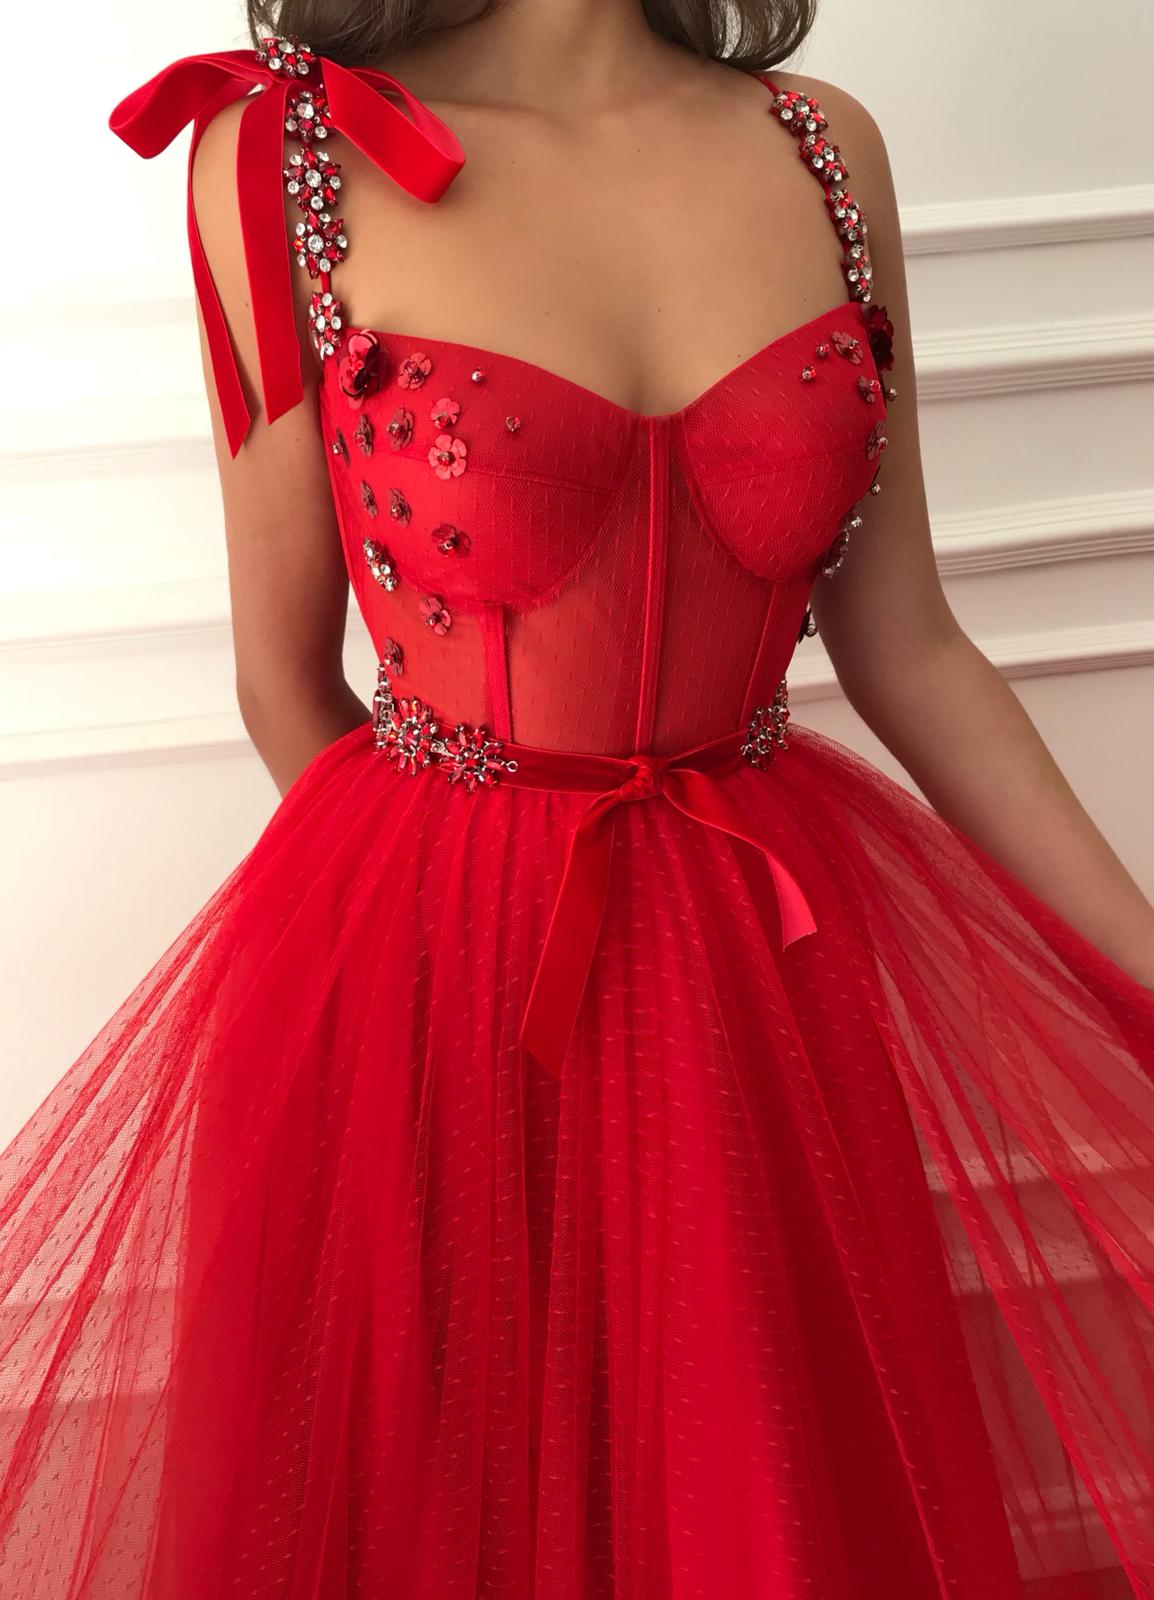 Red A-Line dress with spaghetti straps and embroidery